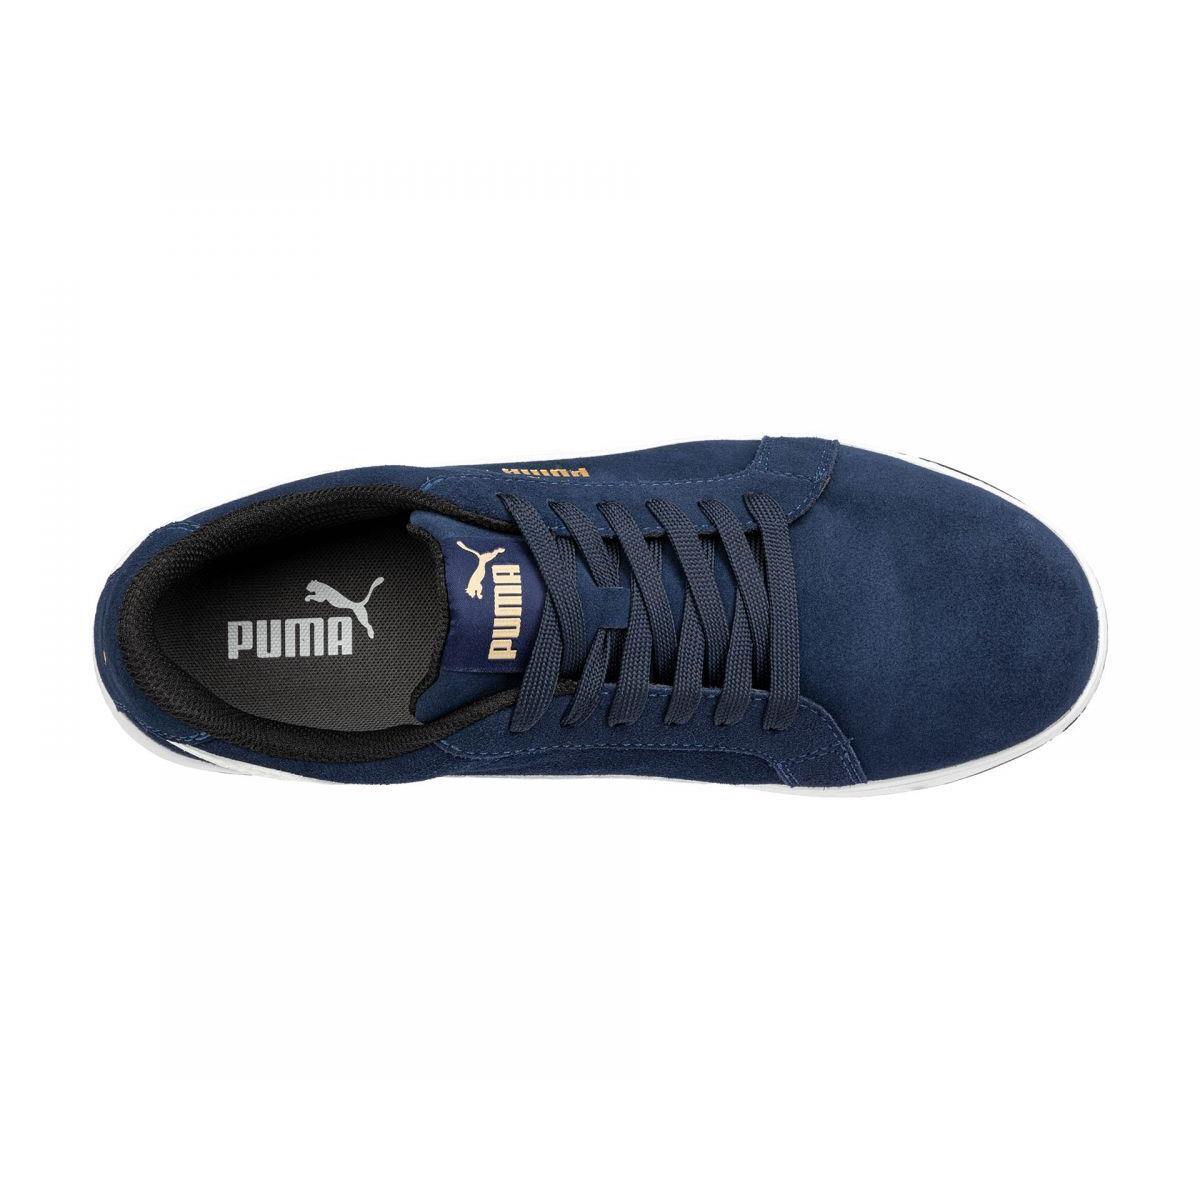 Puma Safety Men`s Iconic Low Composite Toe EH Work Shoes Navy Suede - 640025 Na - Navy